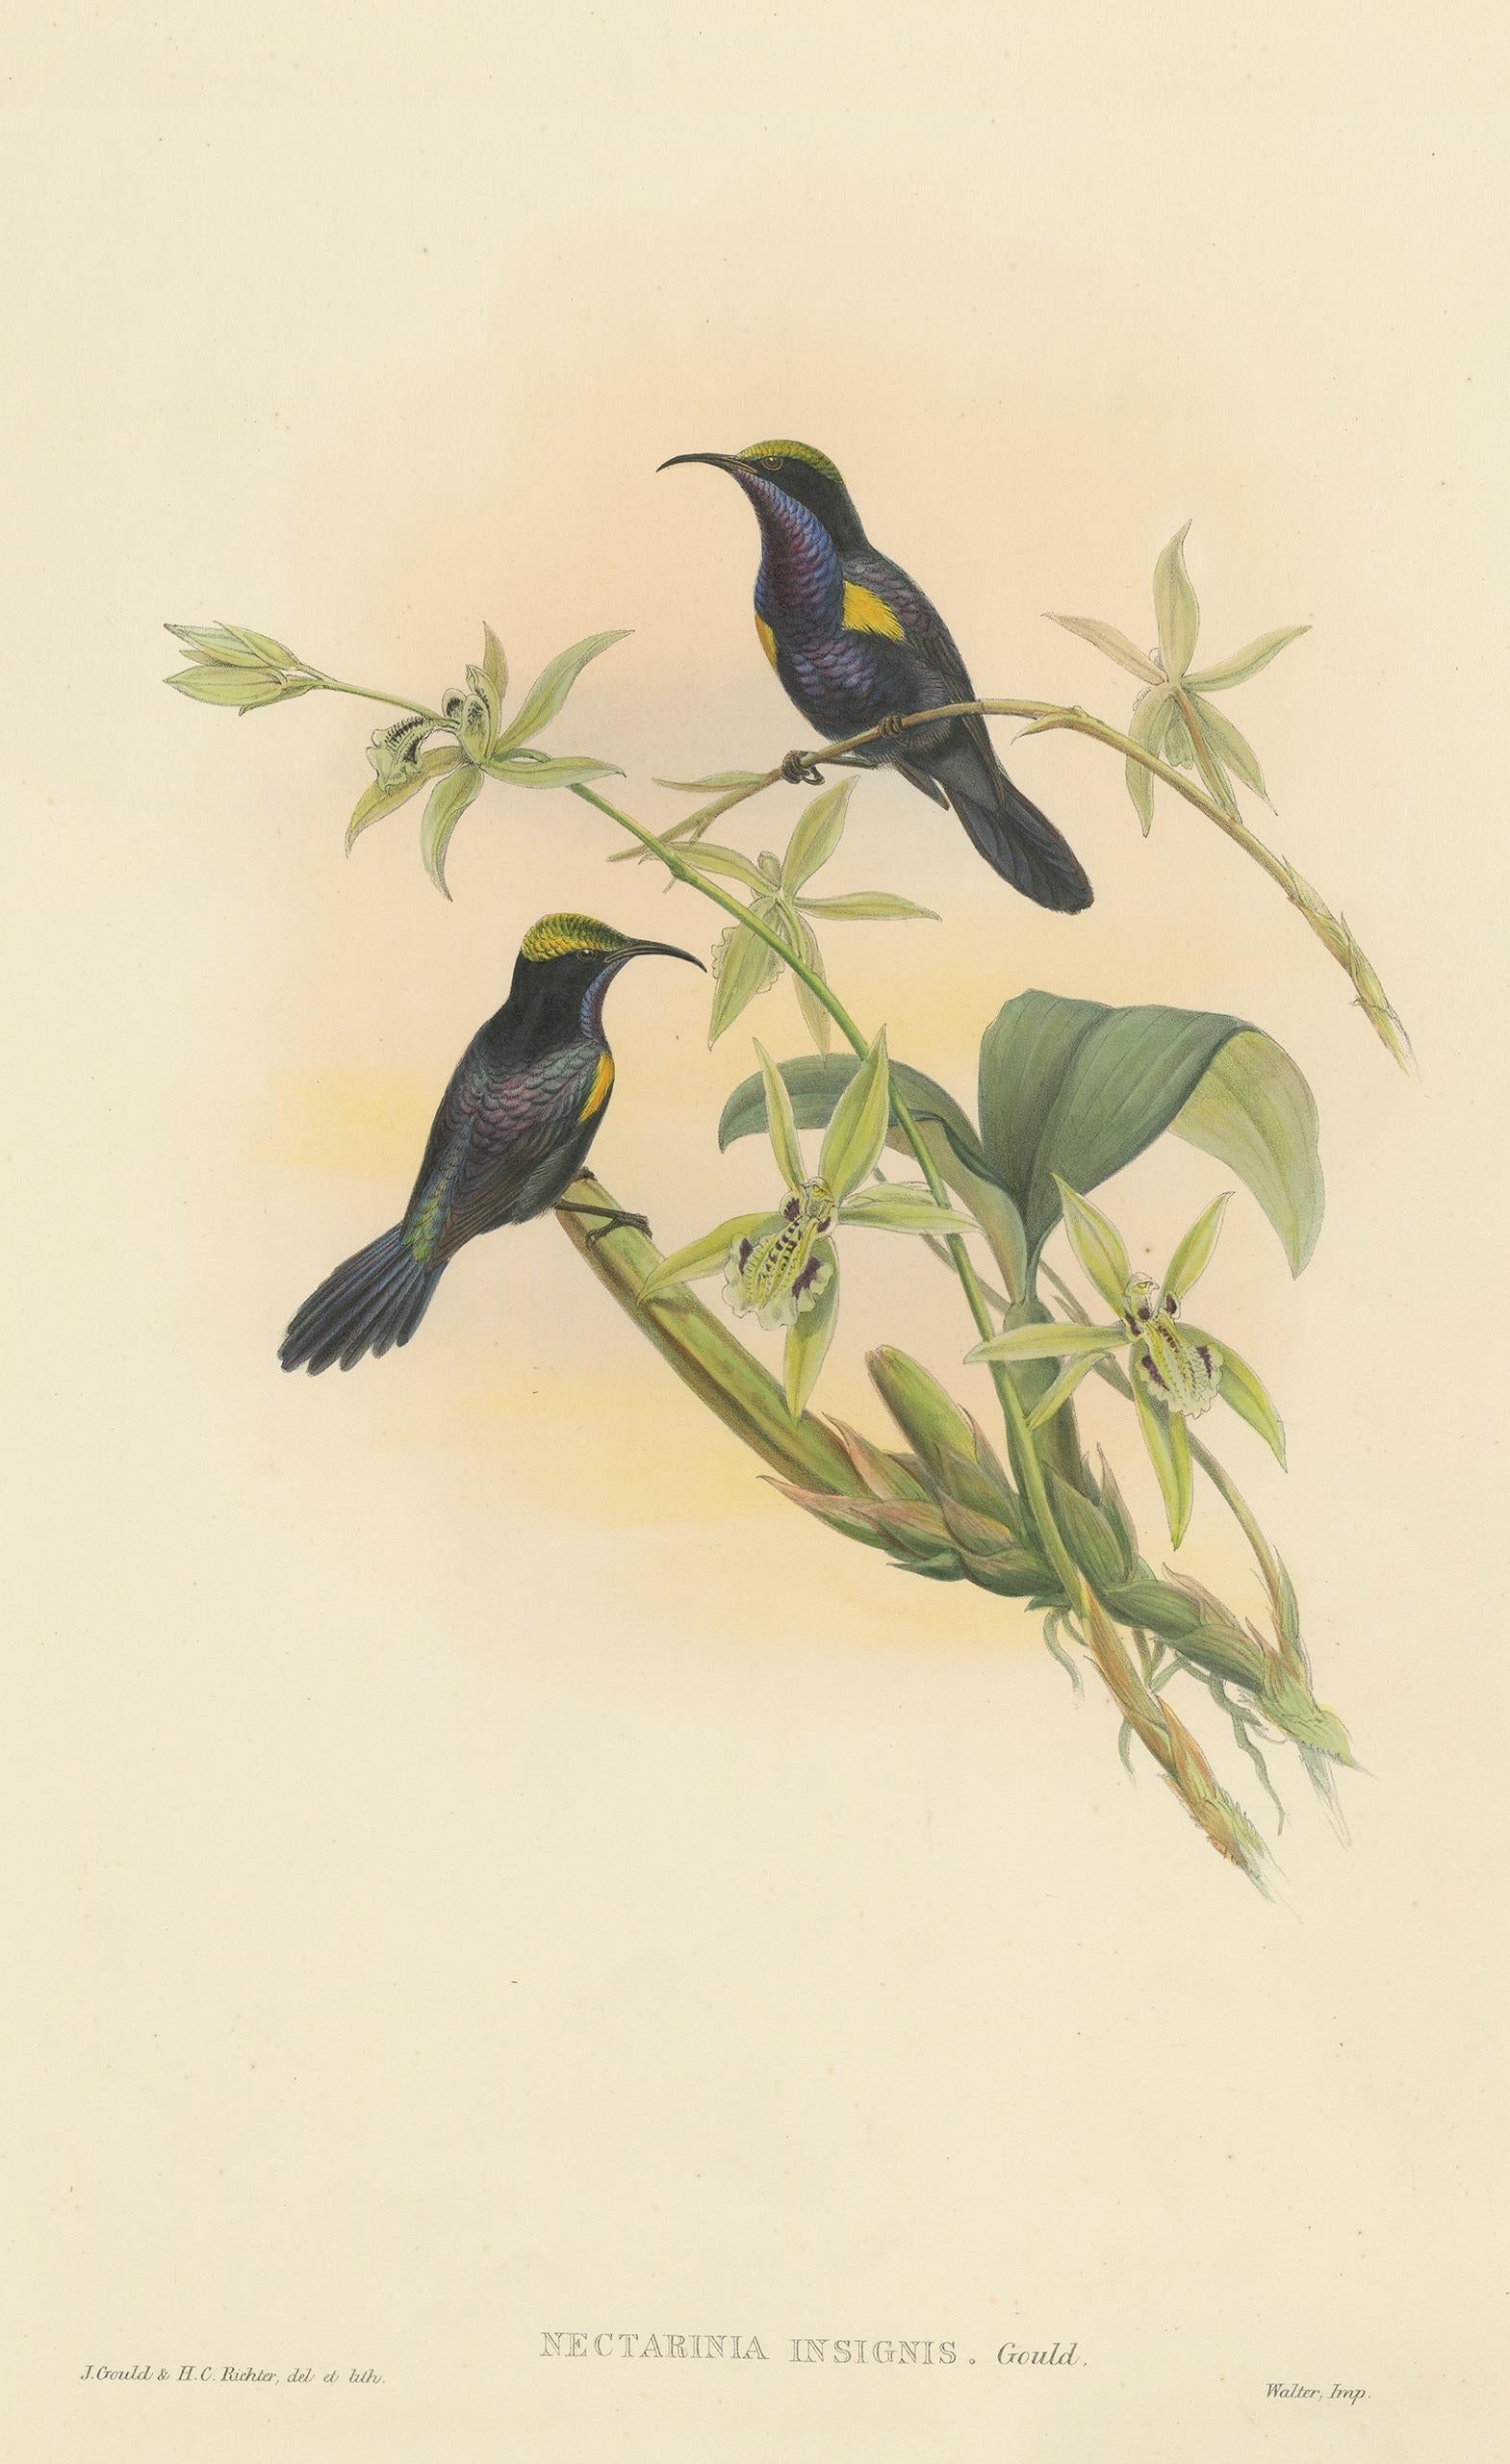 Antique bird print titled 'Nectarinia Insignis'. Original lithograph of the copper-throated sunbird. This print originates from 'Birds of Asia' by John Gould. Published 1850-1853.